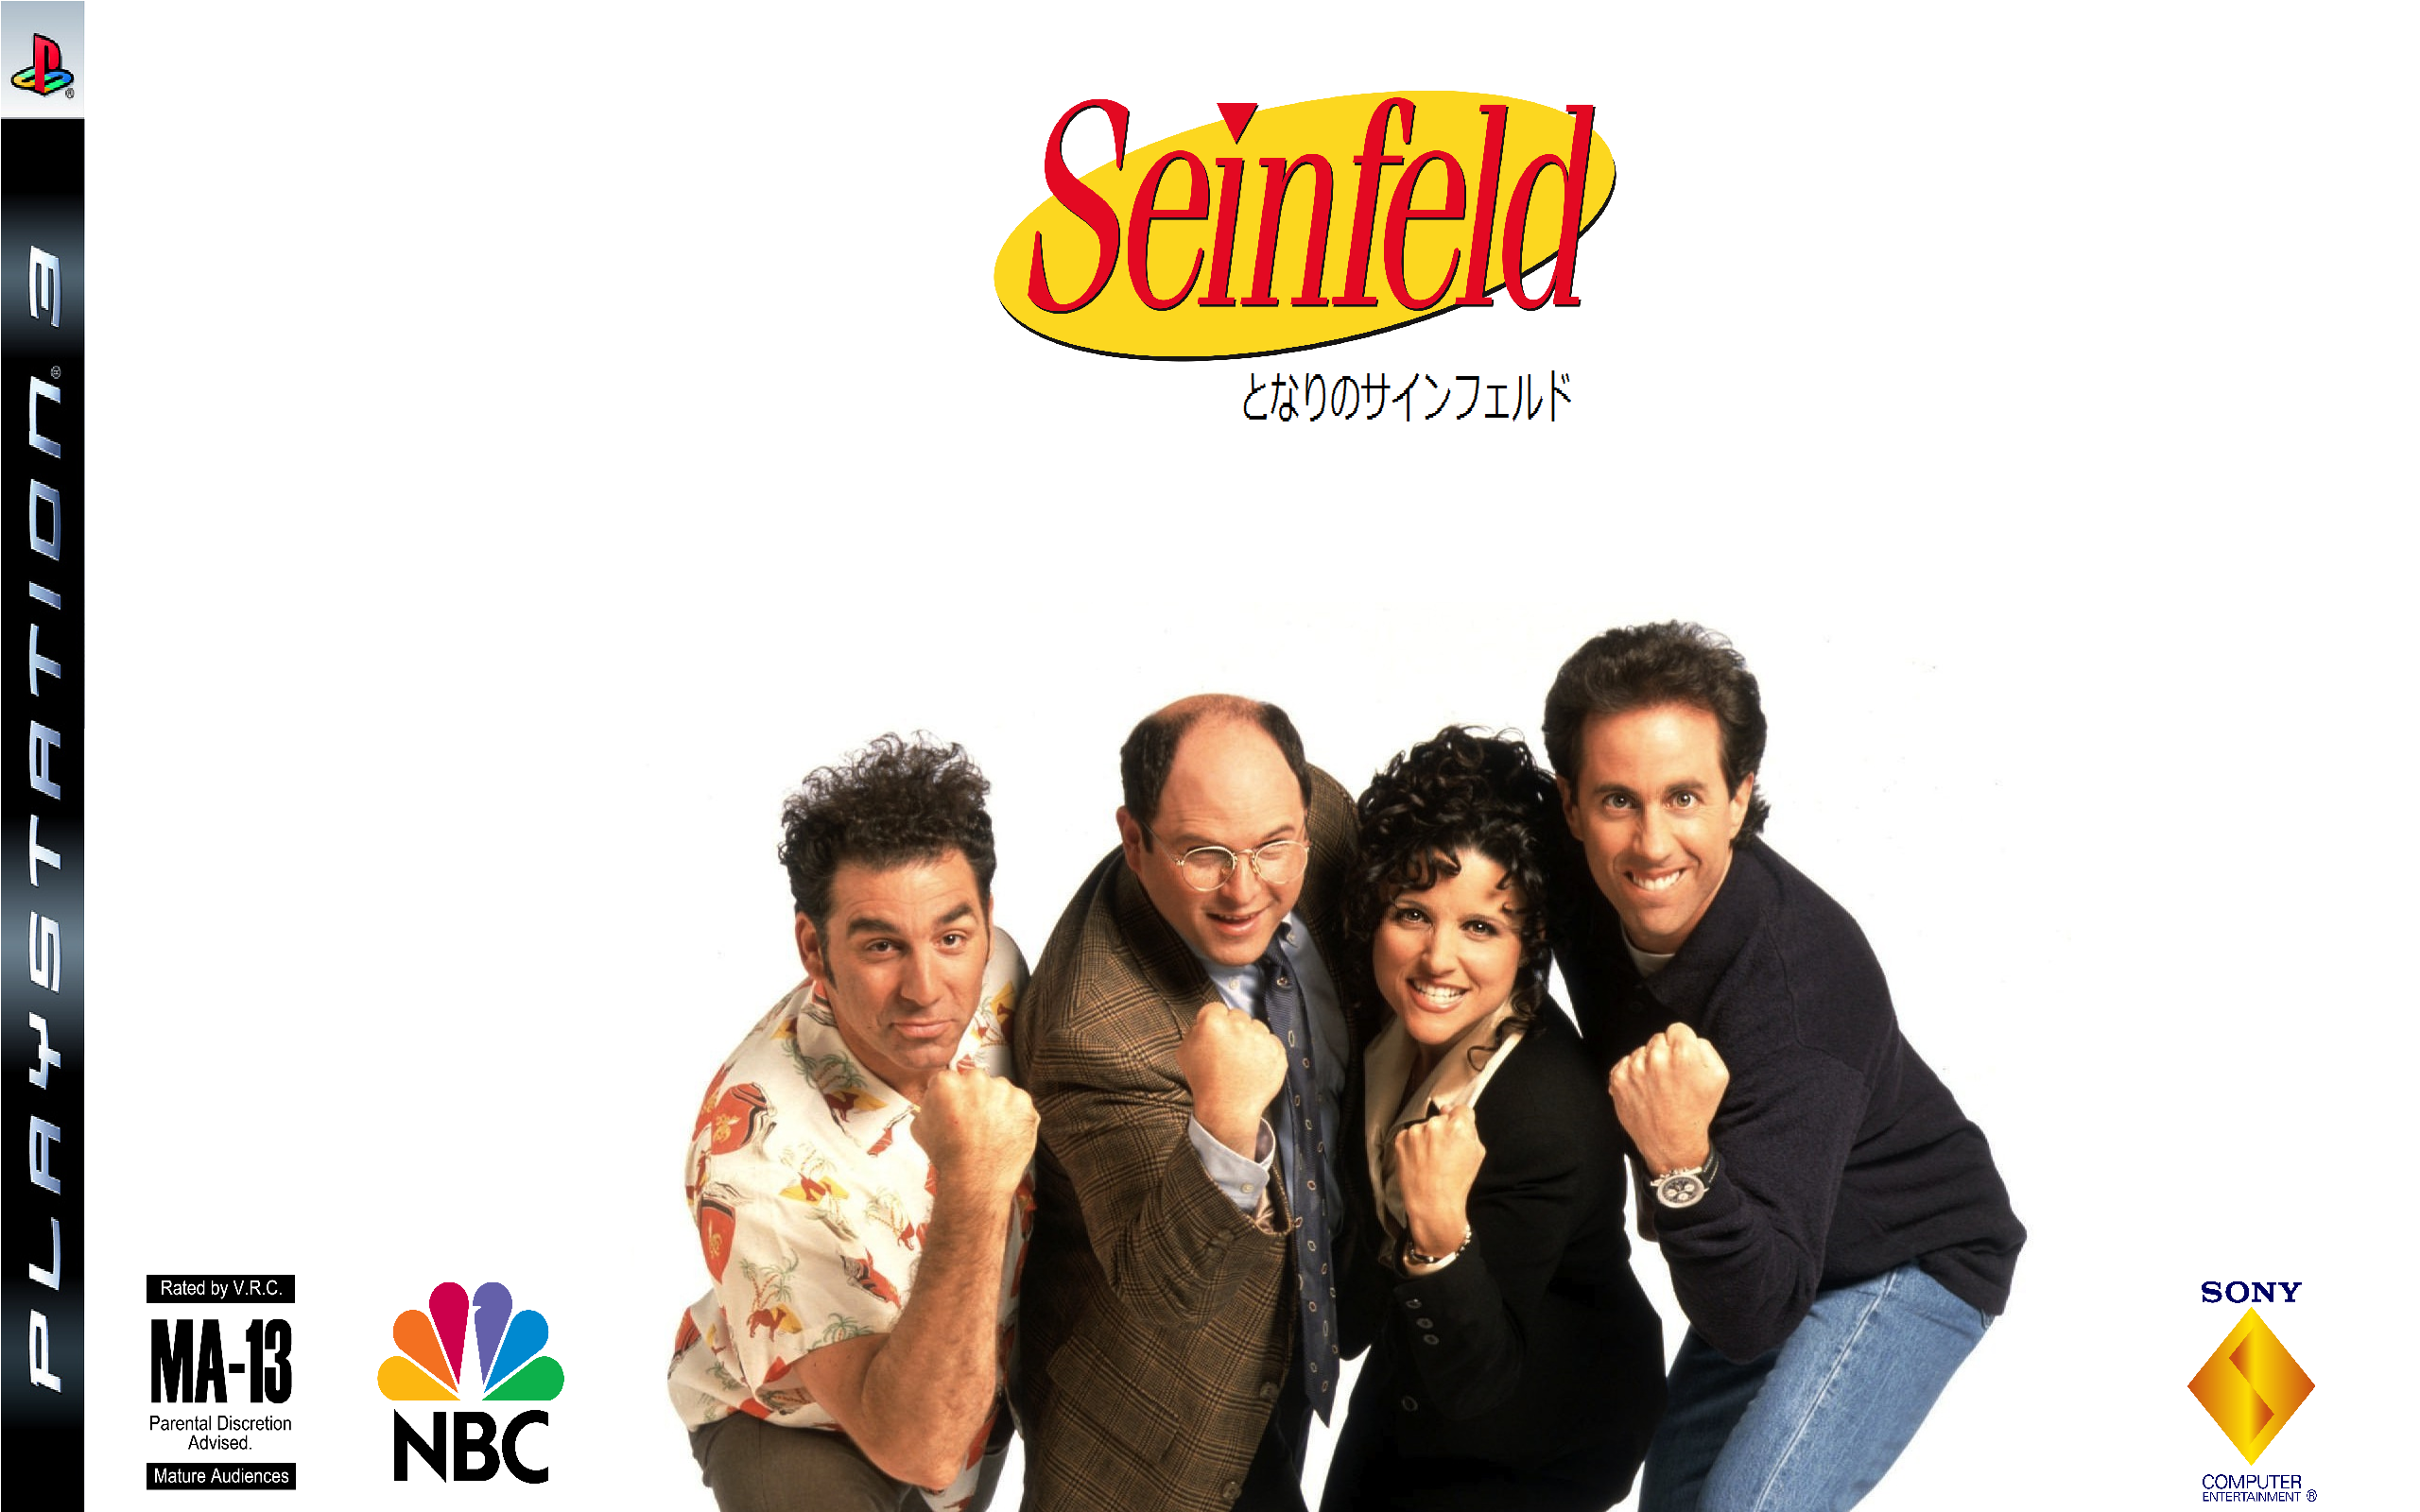 Seinfeld: PlayStation 03 Boxart (Wide Front Cover) by Royameadow ...